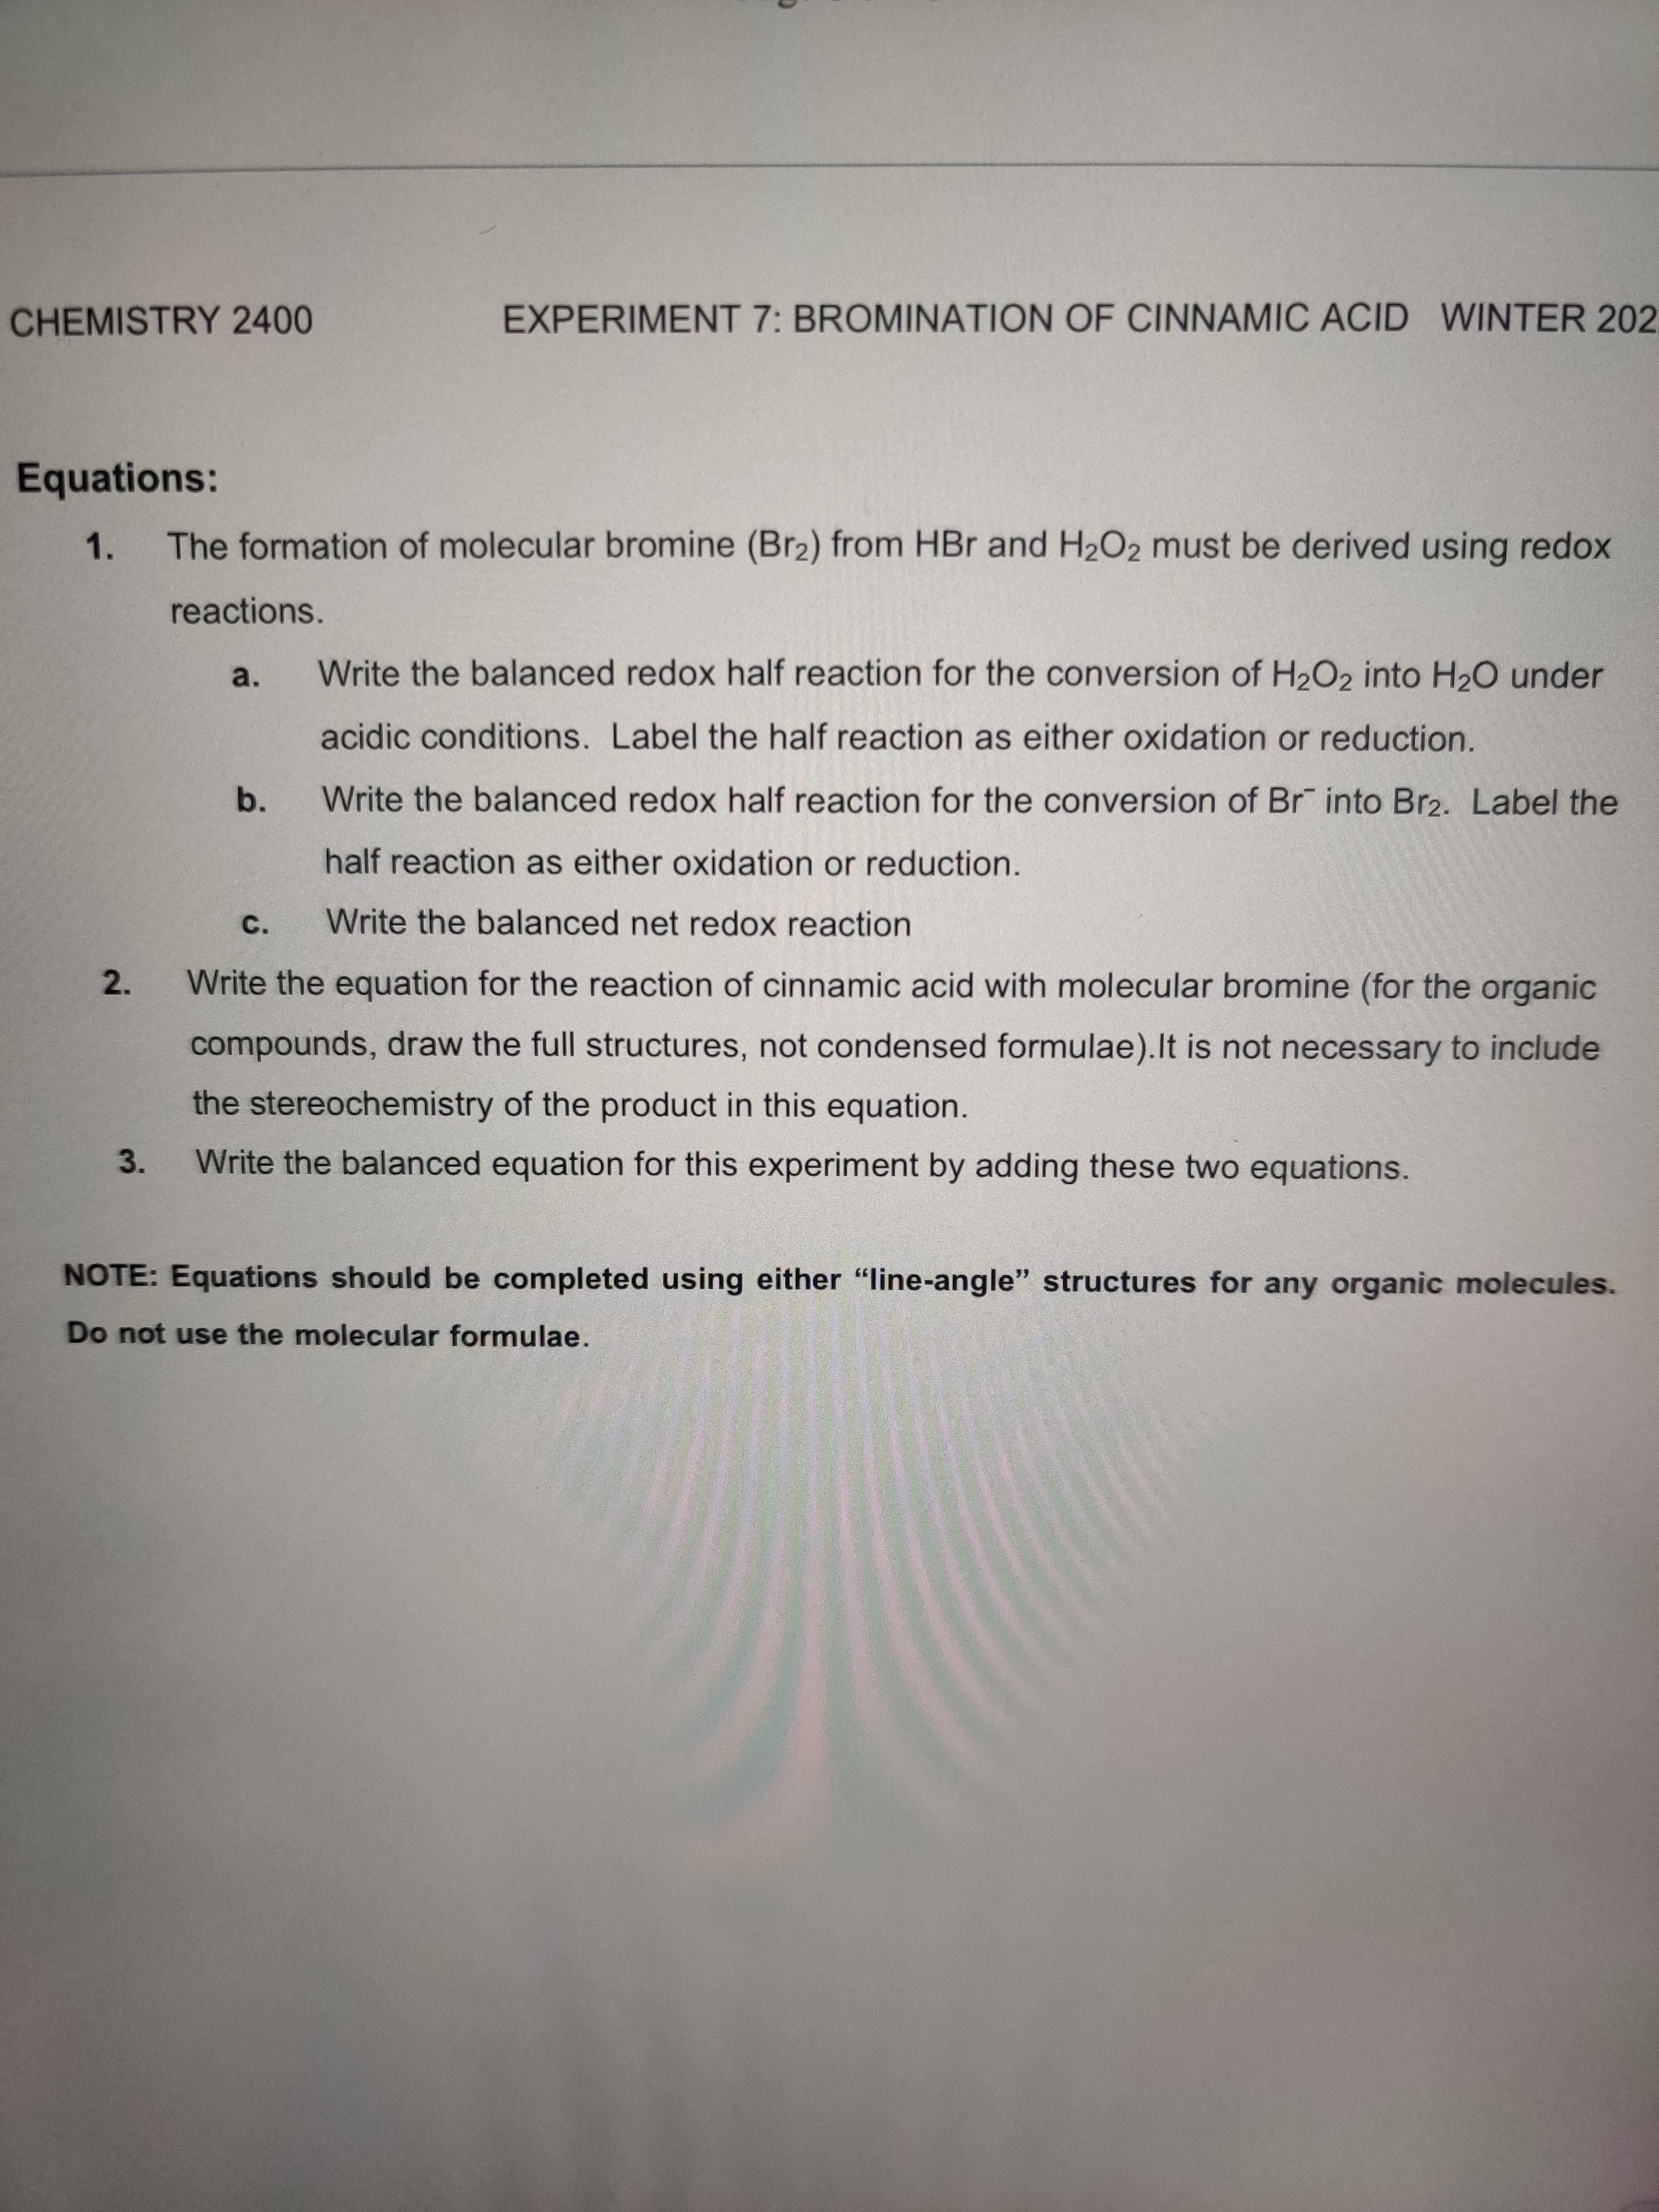 CHEMISTRY 2400
EXPERIMENT 7: BROMINATION OF CINNAMIC ACID WINTER 202.
Equations:
1.
The formation of molecular bromine (Br2) from HBr and H2O2 must be derived using redox
reactions.
a.
Write the balanced redox half reaction for the conversion of H2O2 into H20 under
acidic conditions. Label the half reaction as either oxidation or reduction.
b.
Write the balanced redox half reaction for the conversion of Br into Br2. Label the
half reaction as either oxidation or reduction.
C.
Write the balanced net redox reaction
2.
Write the equation for the reaction of cinnamic acid with molecular bromine (for the organic
compounds, draw the full structures, not condensed formulae).It is not necessary to include
the stereochemistry of the product in this equation.
3.
Write the balanced equation for this experiment by adding these two equations.
NOTE: Equations should be completed using either "line-angle" structures for any organic molecules.
Do not use the molecular formulae.
